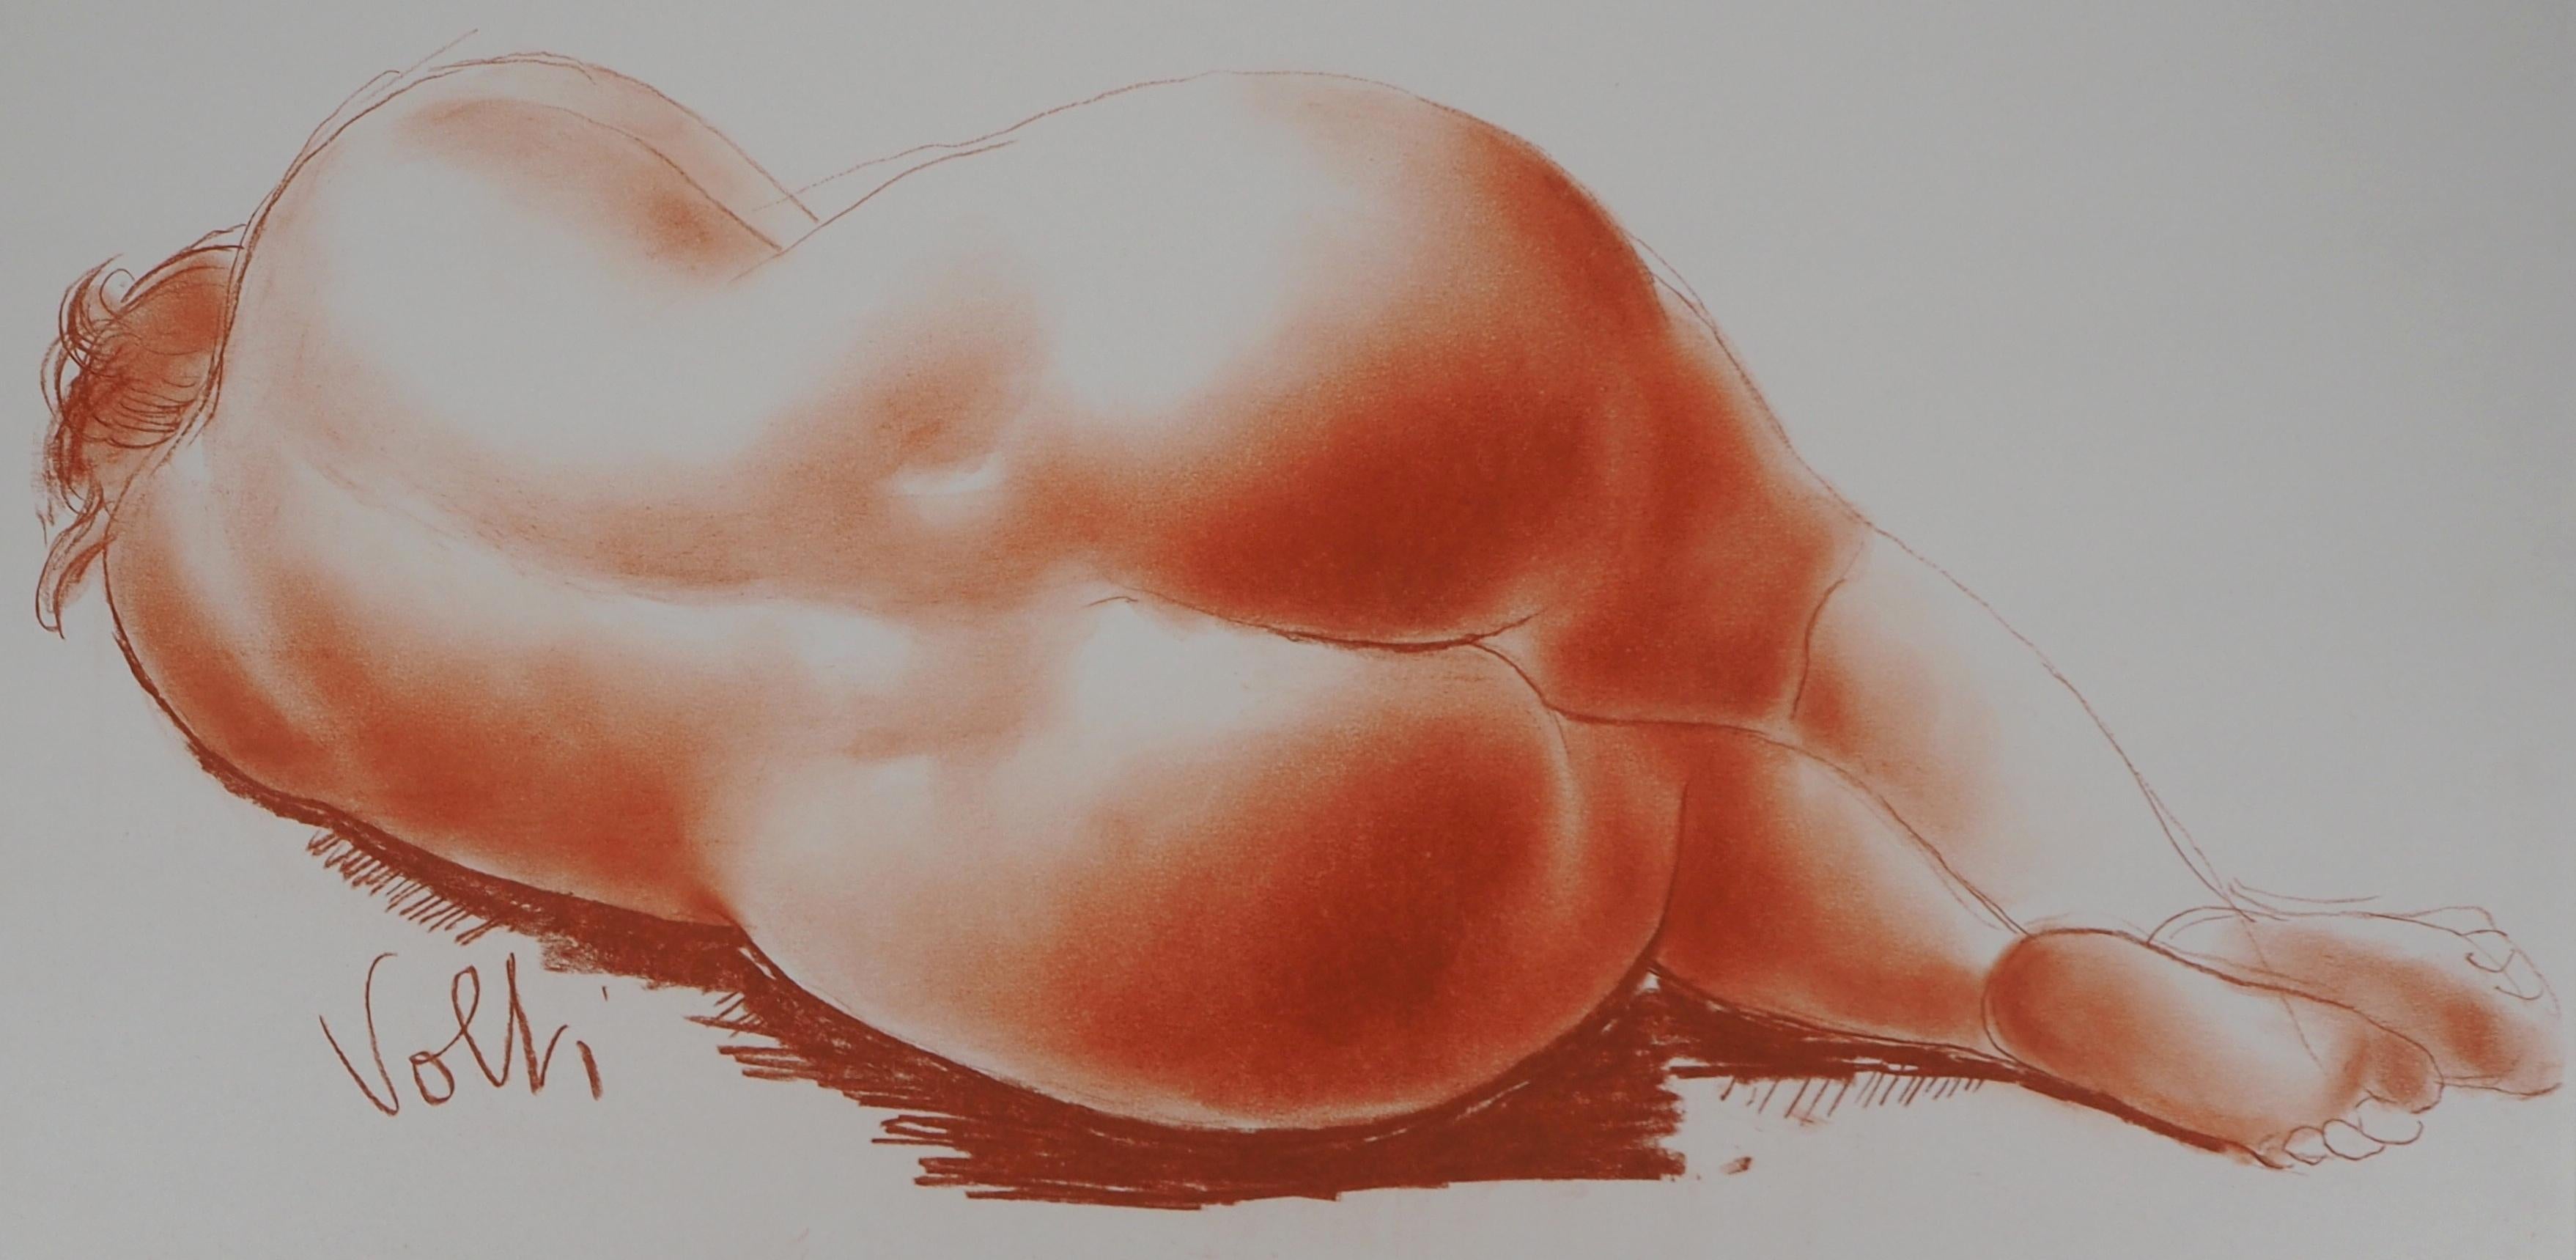 Antoniucci VOLTI
Reclining Nude

Original drawing in sanguine (charcoal)
Handsigned bottom left
On heavy paper 50 x 65 cm (20 x 26 inch)

Excellent condition